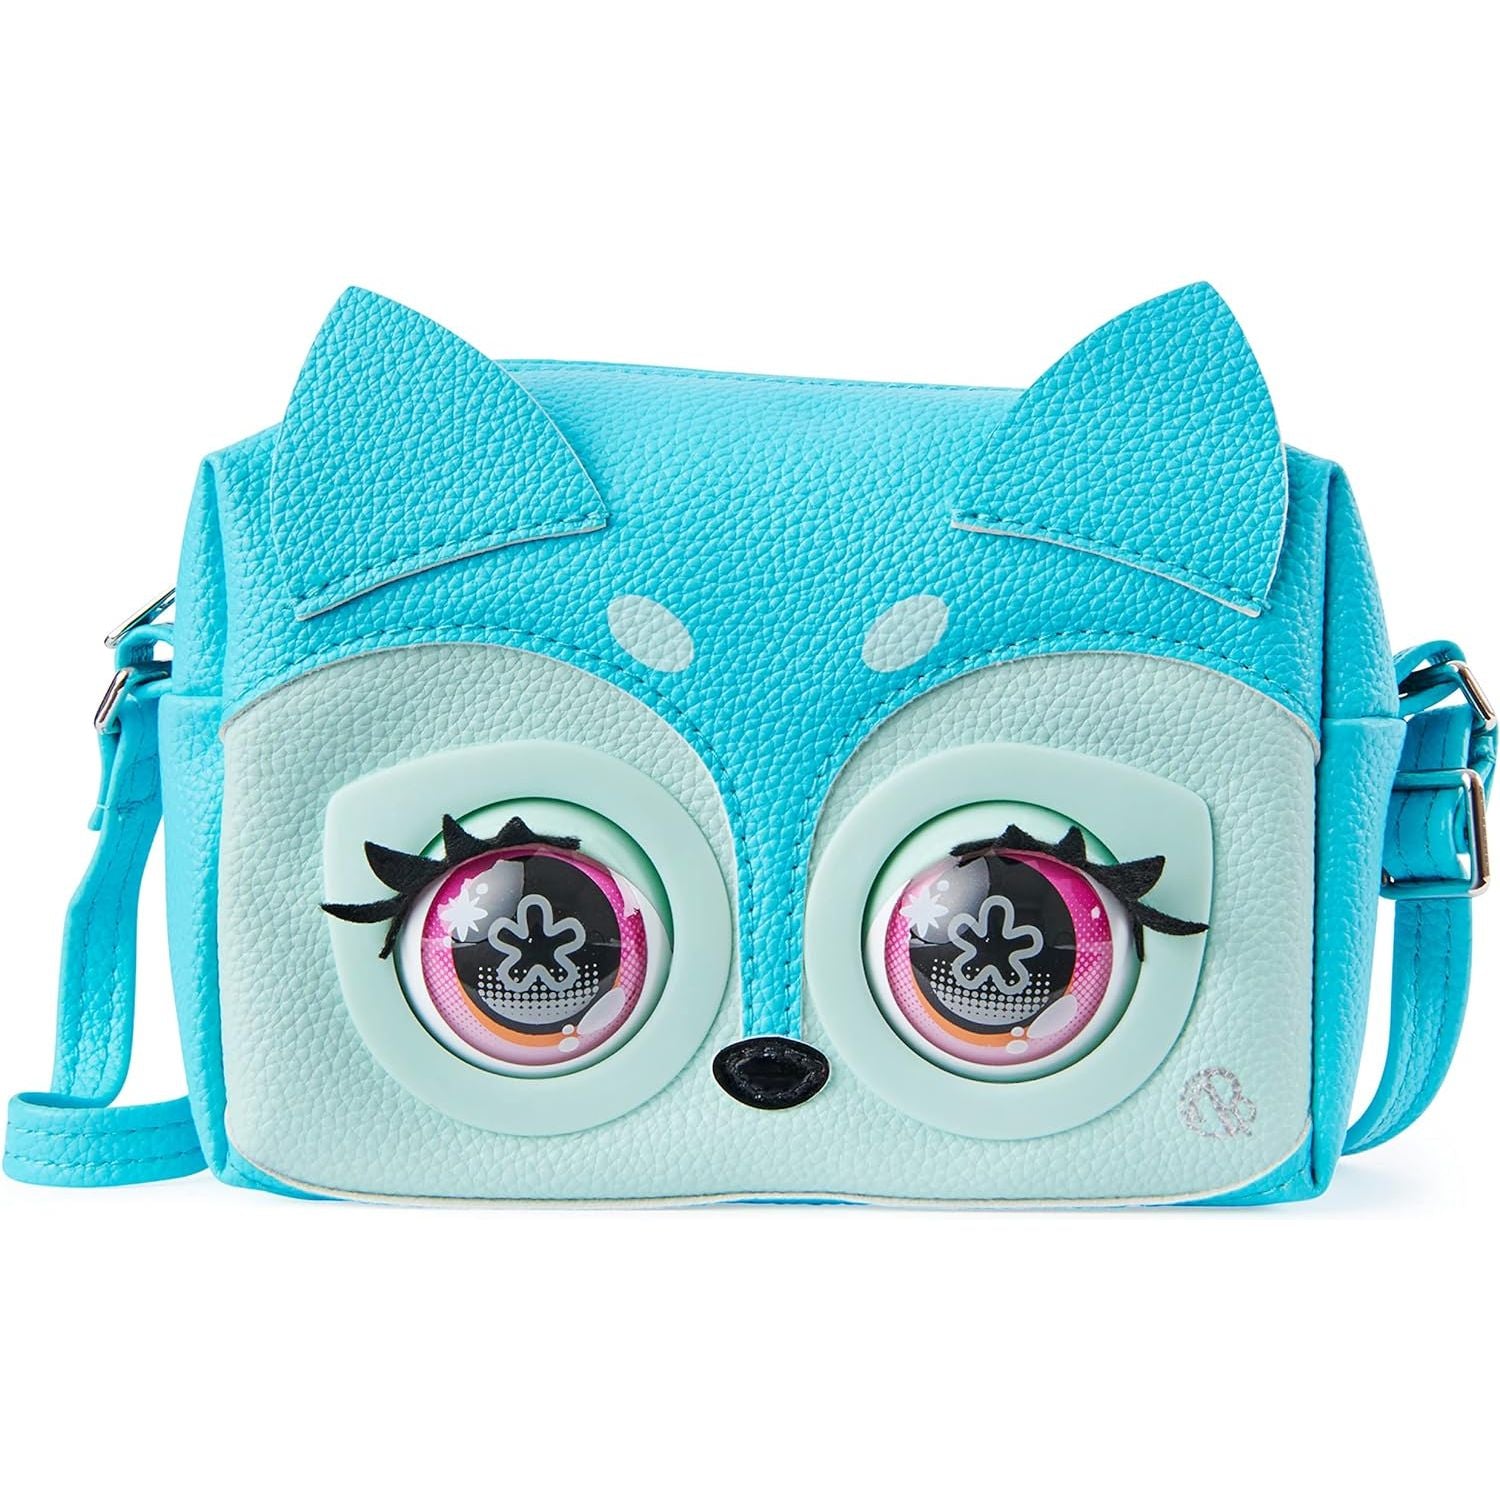 Purse Pets, Fierce Fox Interactive Pet Toy & Crossbody Kids Purse with Over 25 Sounds and Reactions, Shoulder Bag for Girls, Trendy Tween Gifts